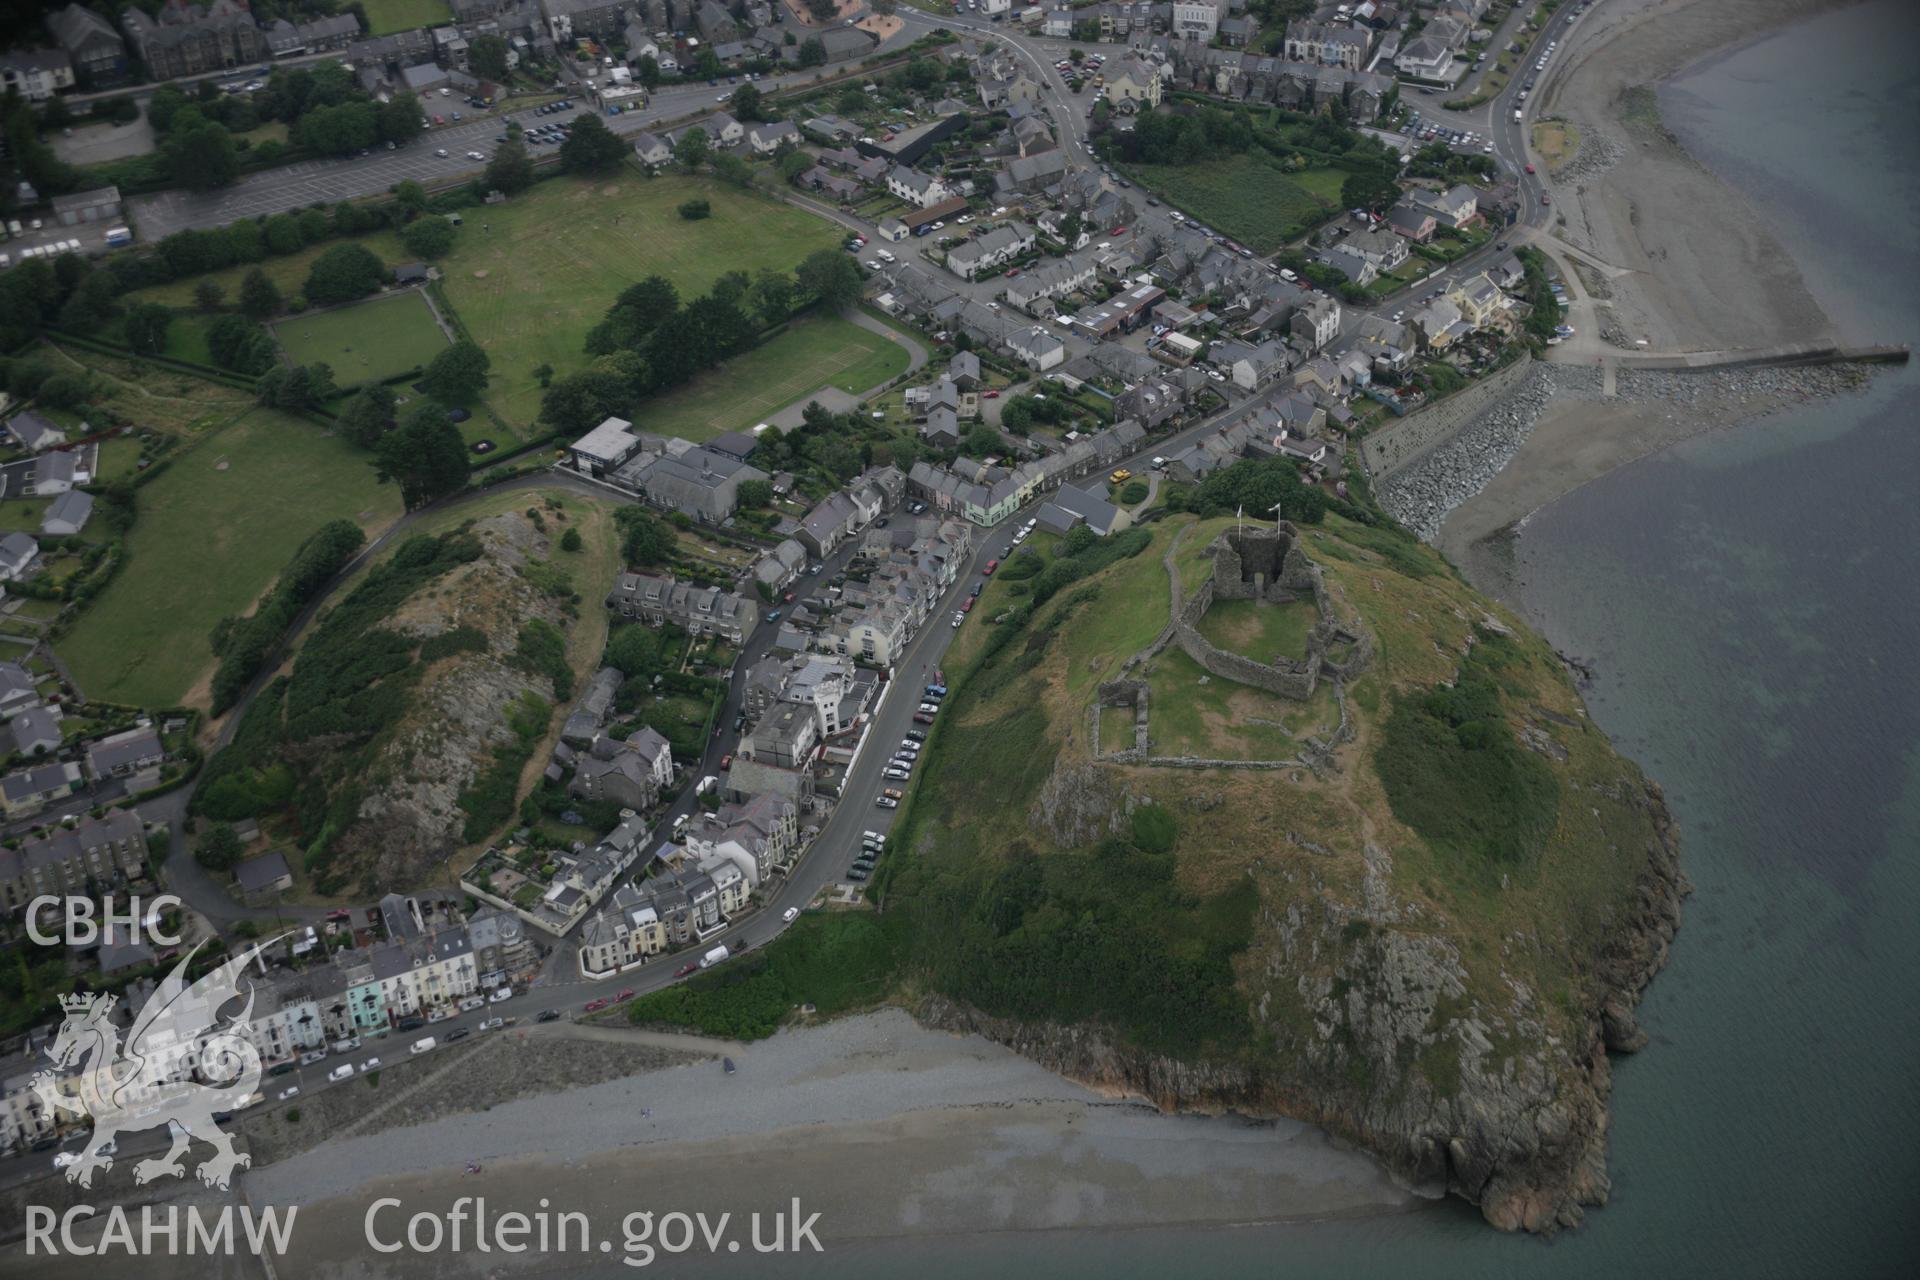 RCAHMW digital colour oblique photograph of Criccieth Castle and town viewed from the south-west. Taken on 27/07/2005 by T.G. Driver.